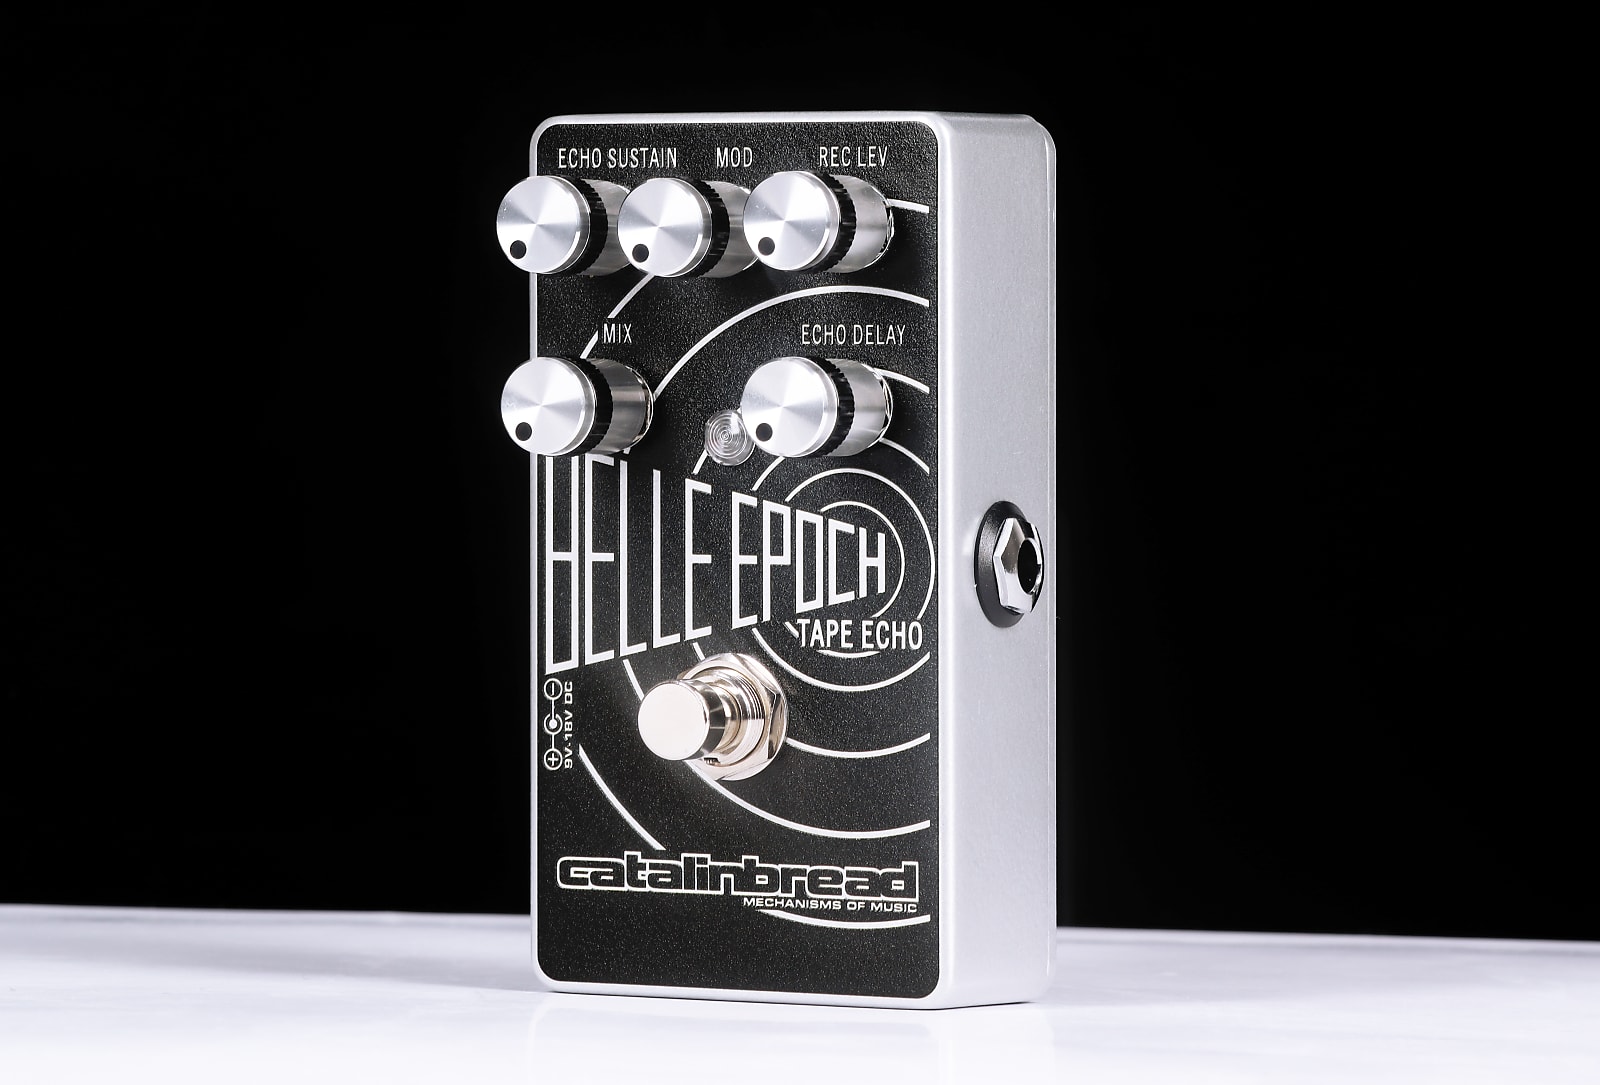 Catalinbread Belle Epoch EP3 Tape Echo Emulation Delay Effects Pedal Silver and Black